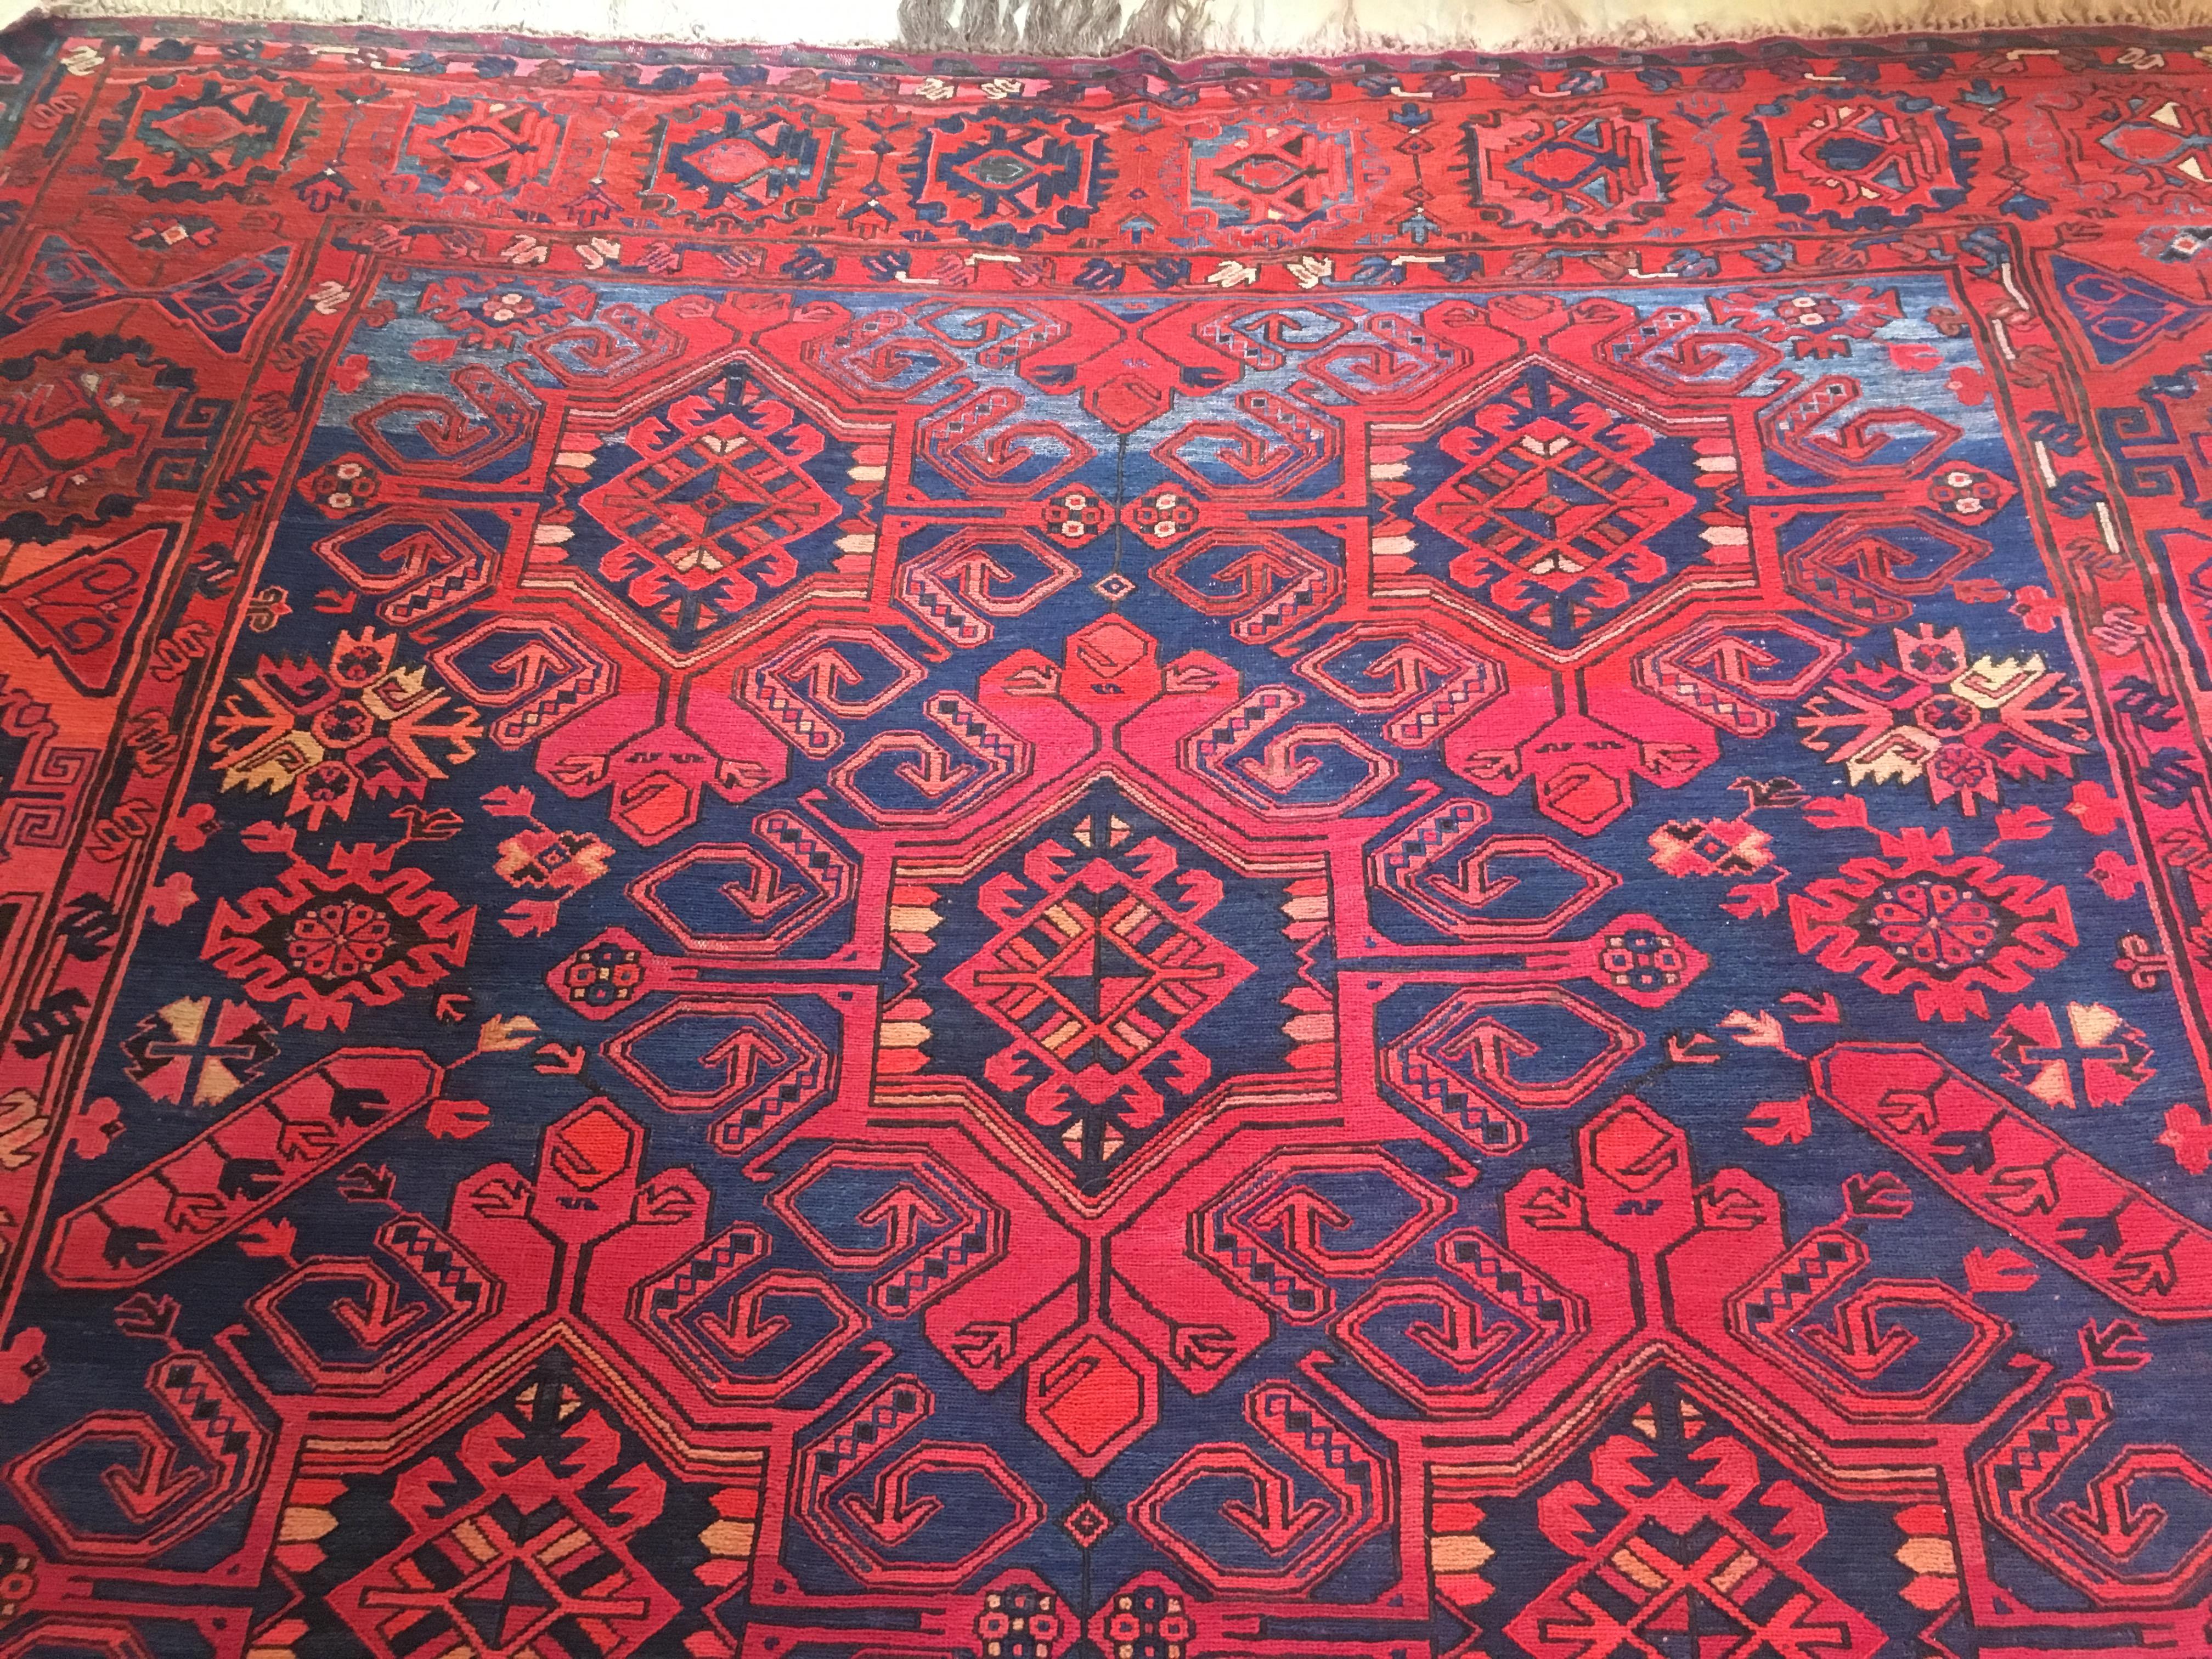 Large tribal carpet or rug with magnificent vivid colors and interesting Art Deco motifs. A wonderful example displaying a vibrant tribal sensibility, carpets like this also draw upon the classical weaving traditions from earlier centuries. 

This